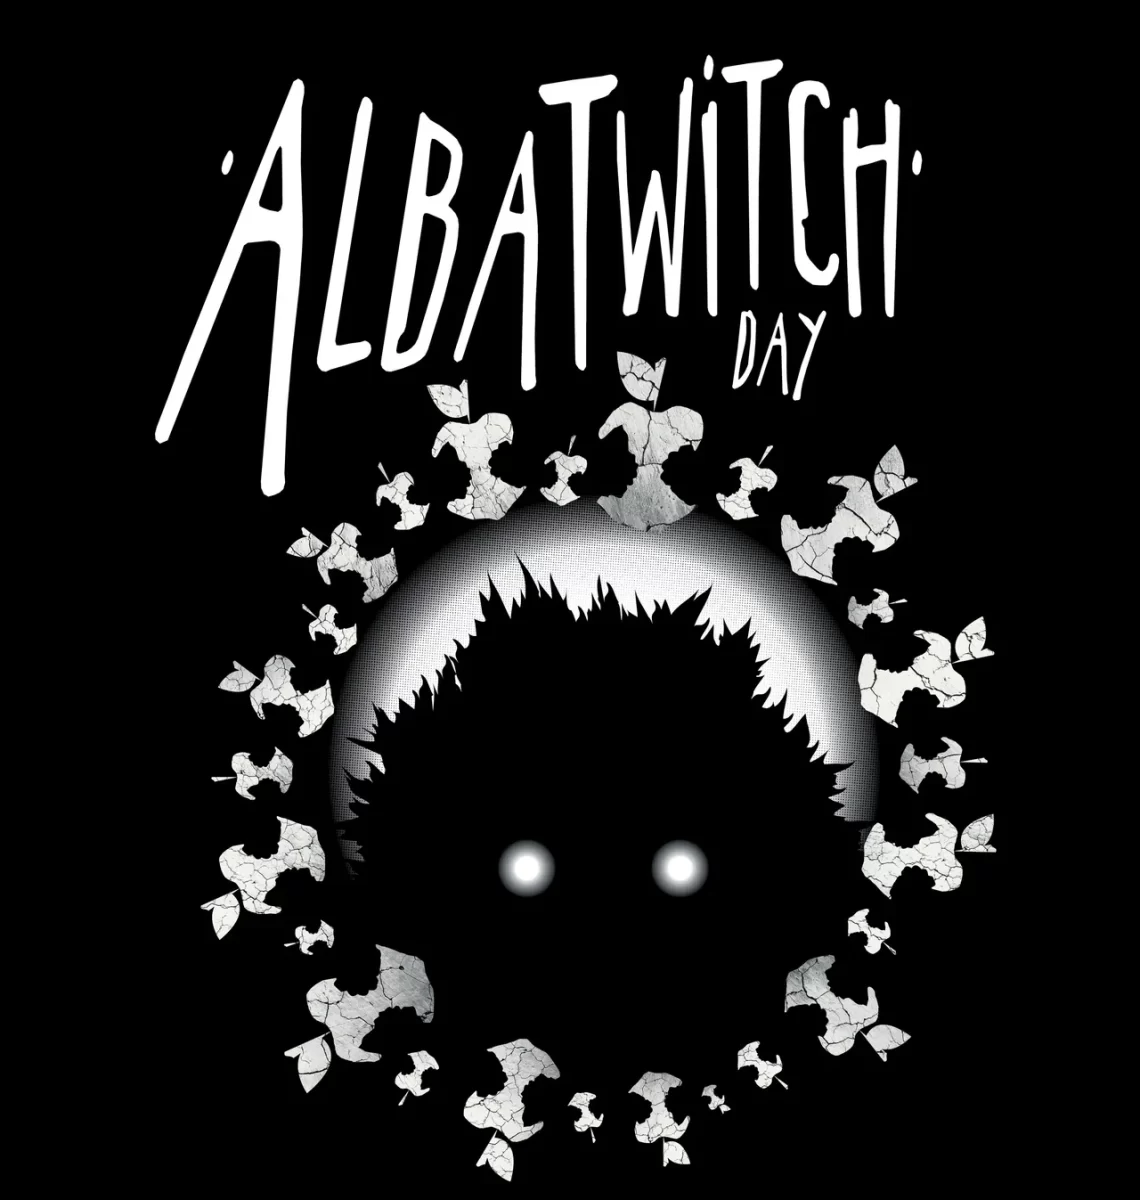 The Search for Bigfoot at the Albatwitch Day Festival